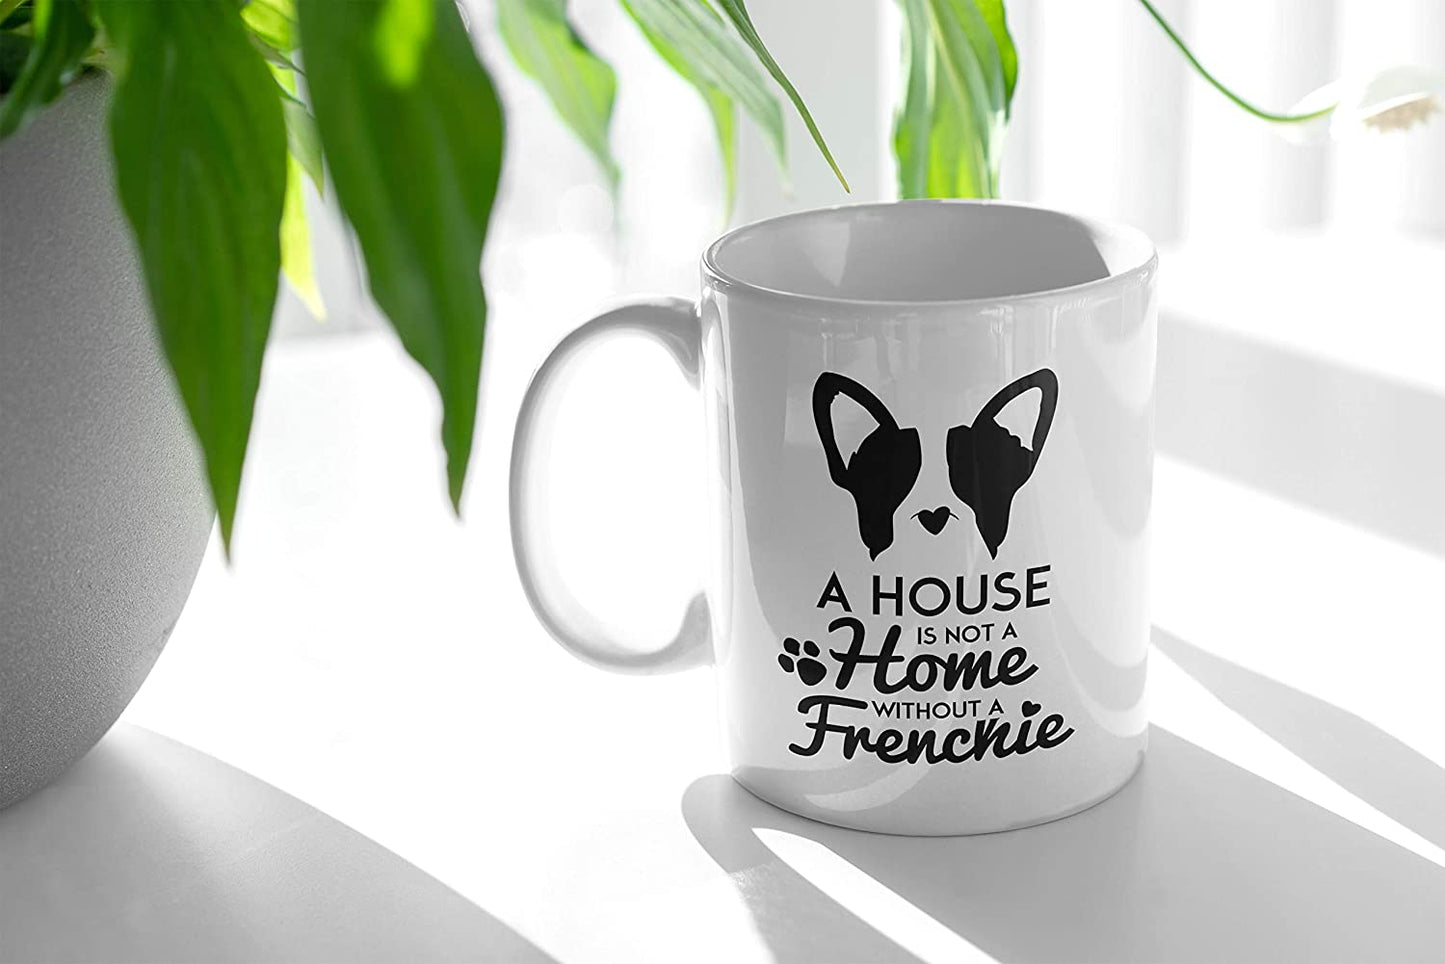 Dark Olive Green Tazza Bulldog Francese - Mug A House is Not a Home Without a Frenchie - Choose Ur Color Cuc shop